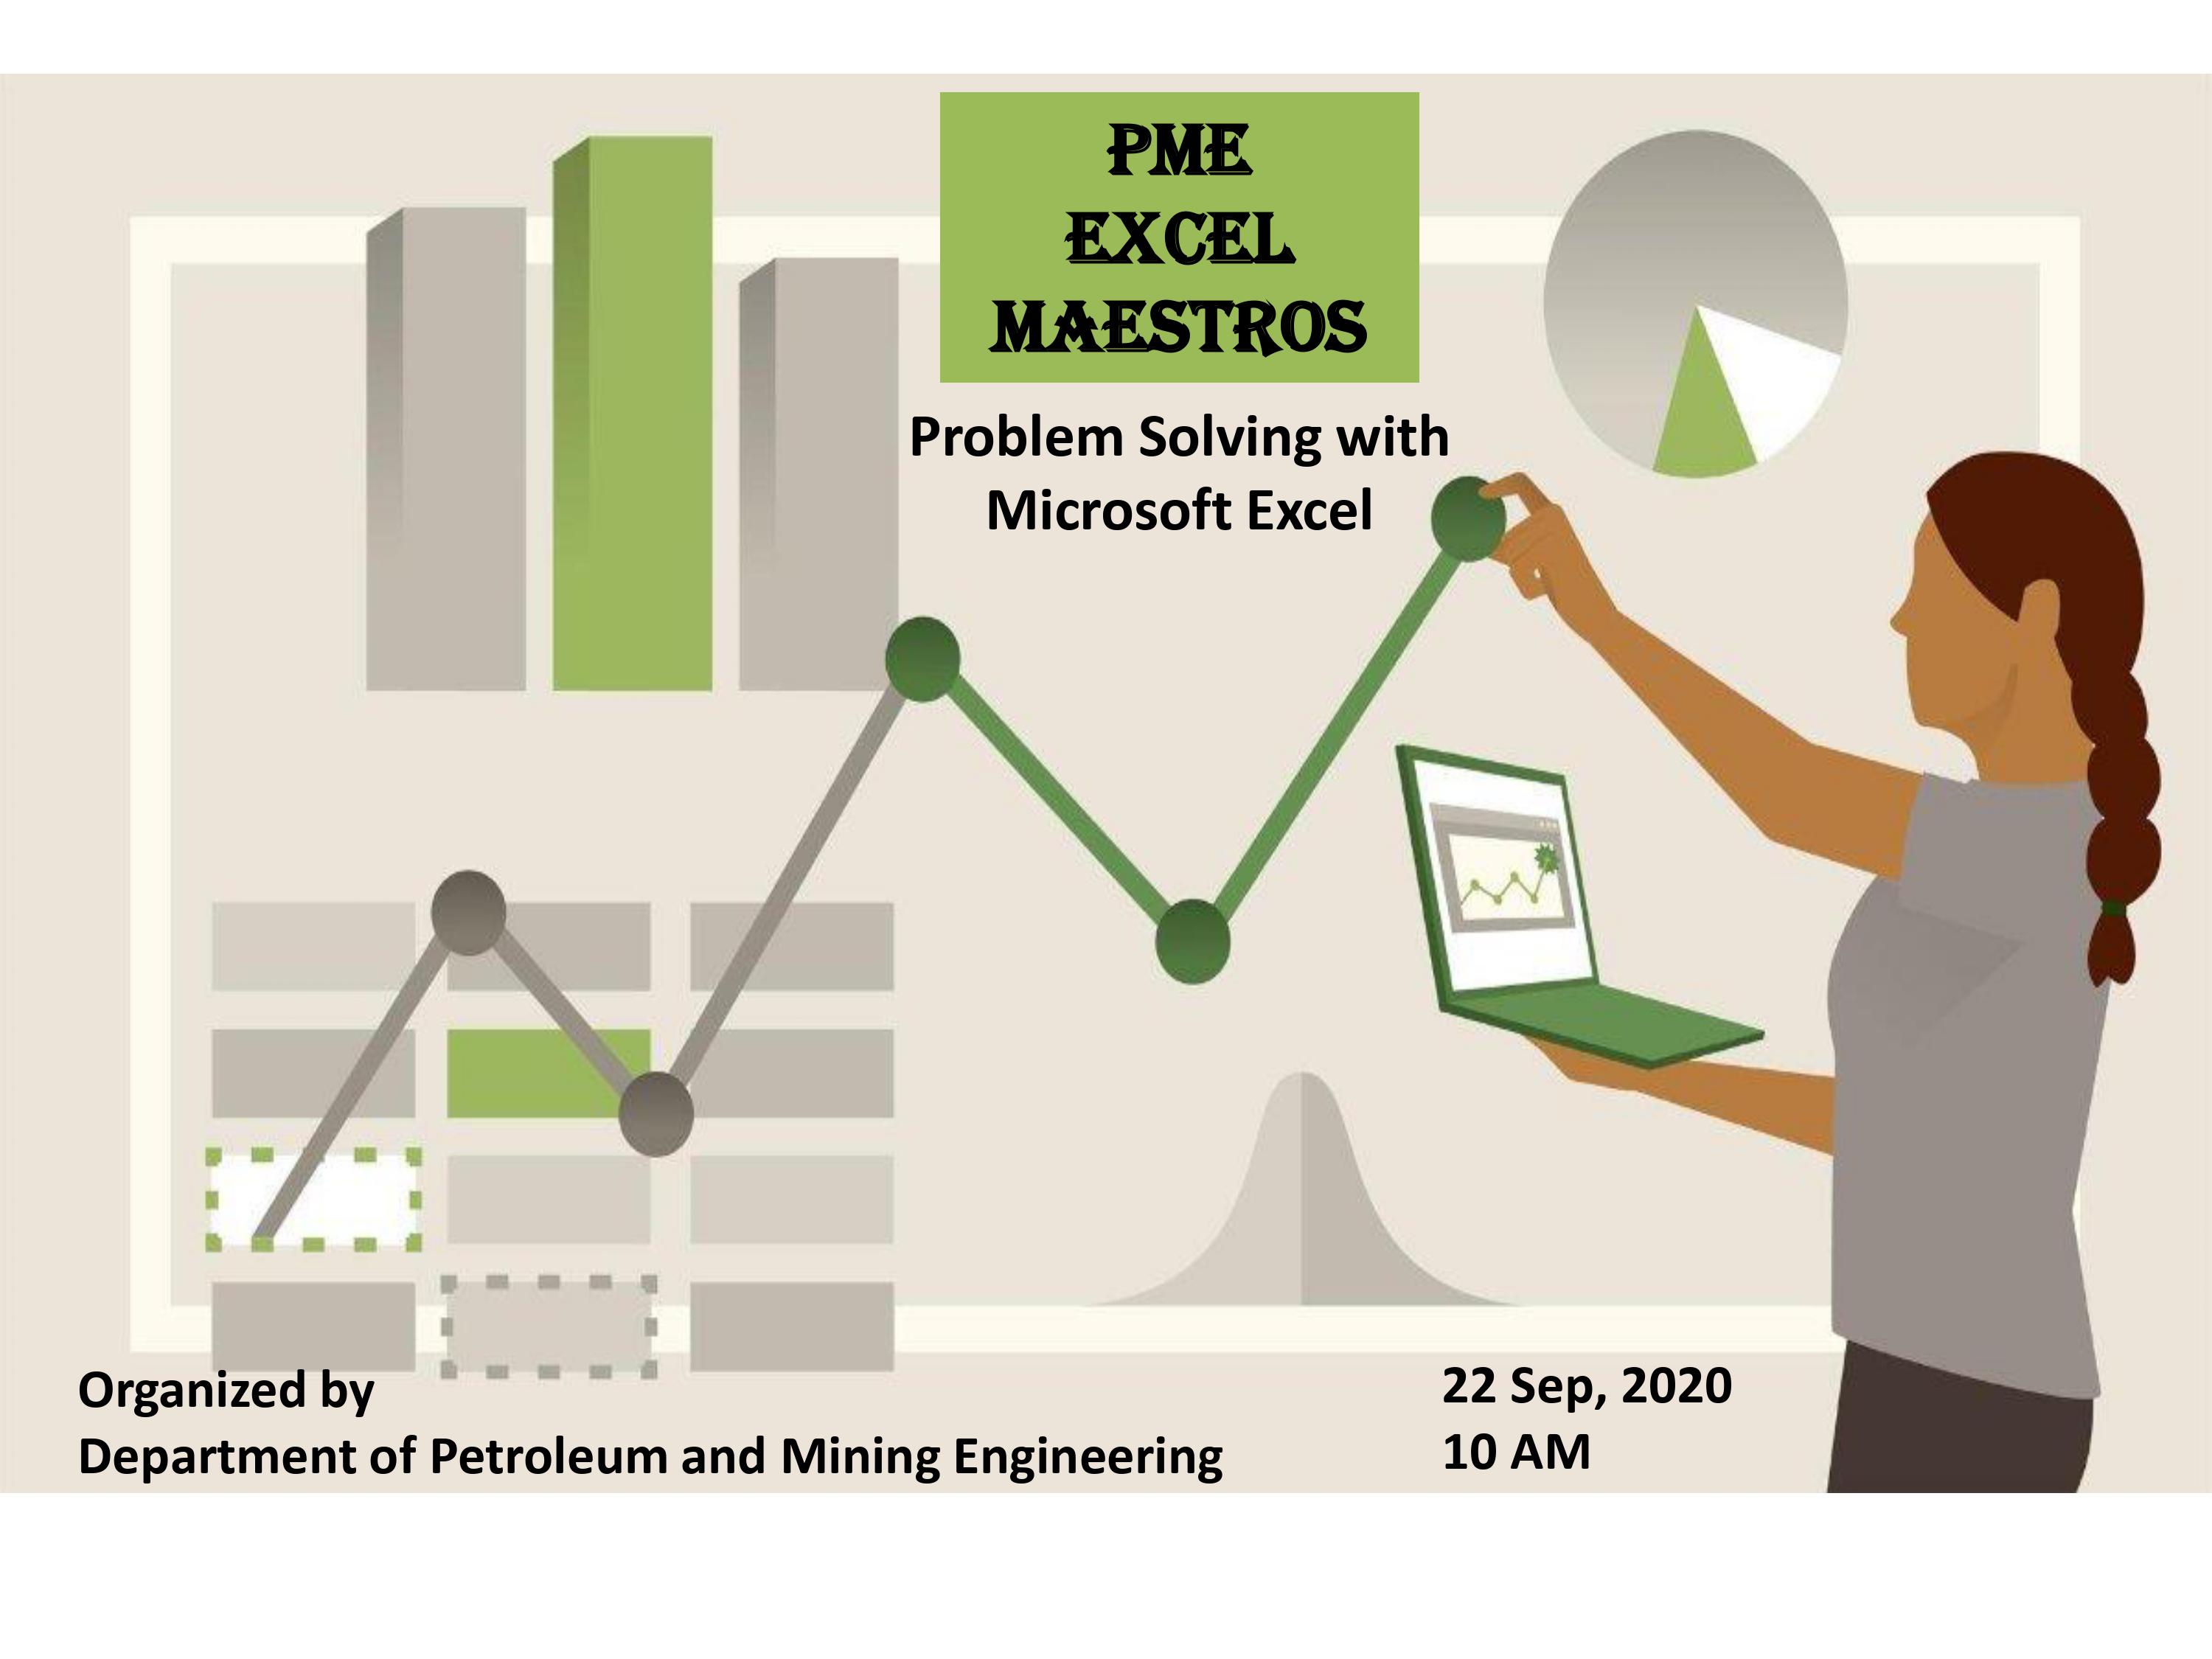 "PME EXCEL MAESTROS- PROBLEM SOLVING WITH MICROSOFT EXCEL" ARRANGED BY DEPARTMENT OF PETROLEUM AND MINING ENGINEERING